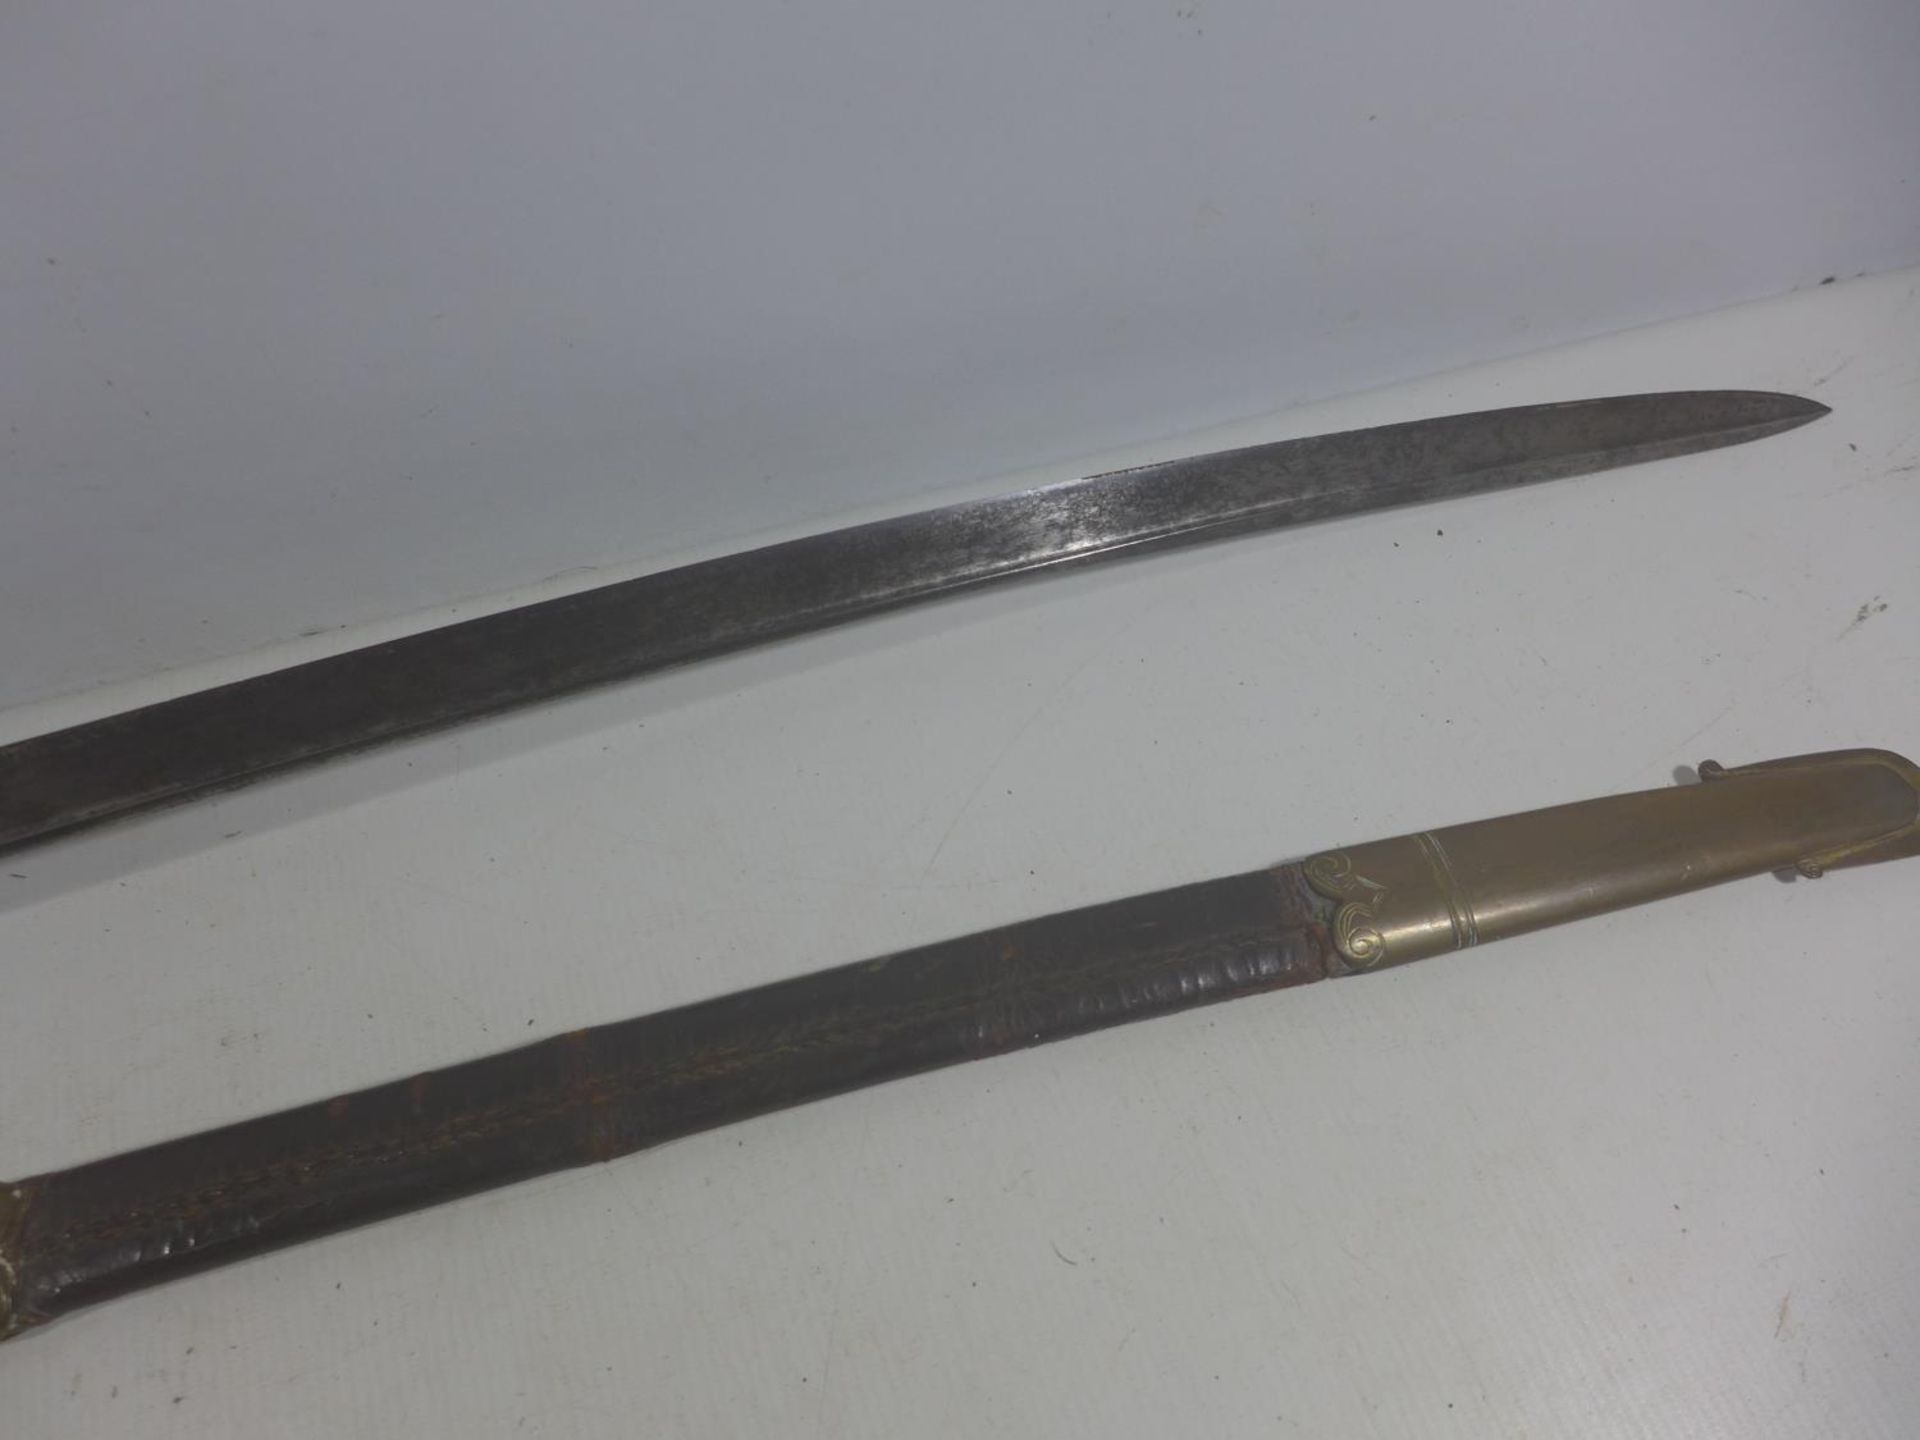 A WILLIAM IV 1822 PATTERN OFFICERS SWORD AND SCABBARD, 82CM BLADE WITH ACID ETCHED DECORATION, - Image 6 of 9